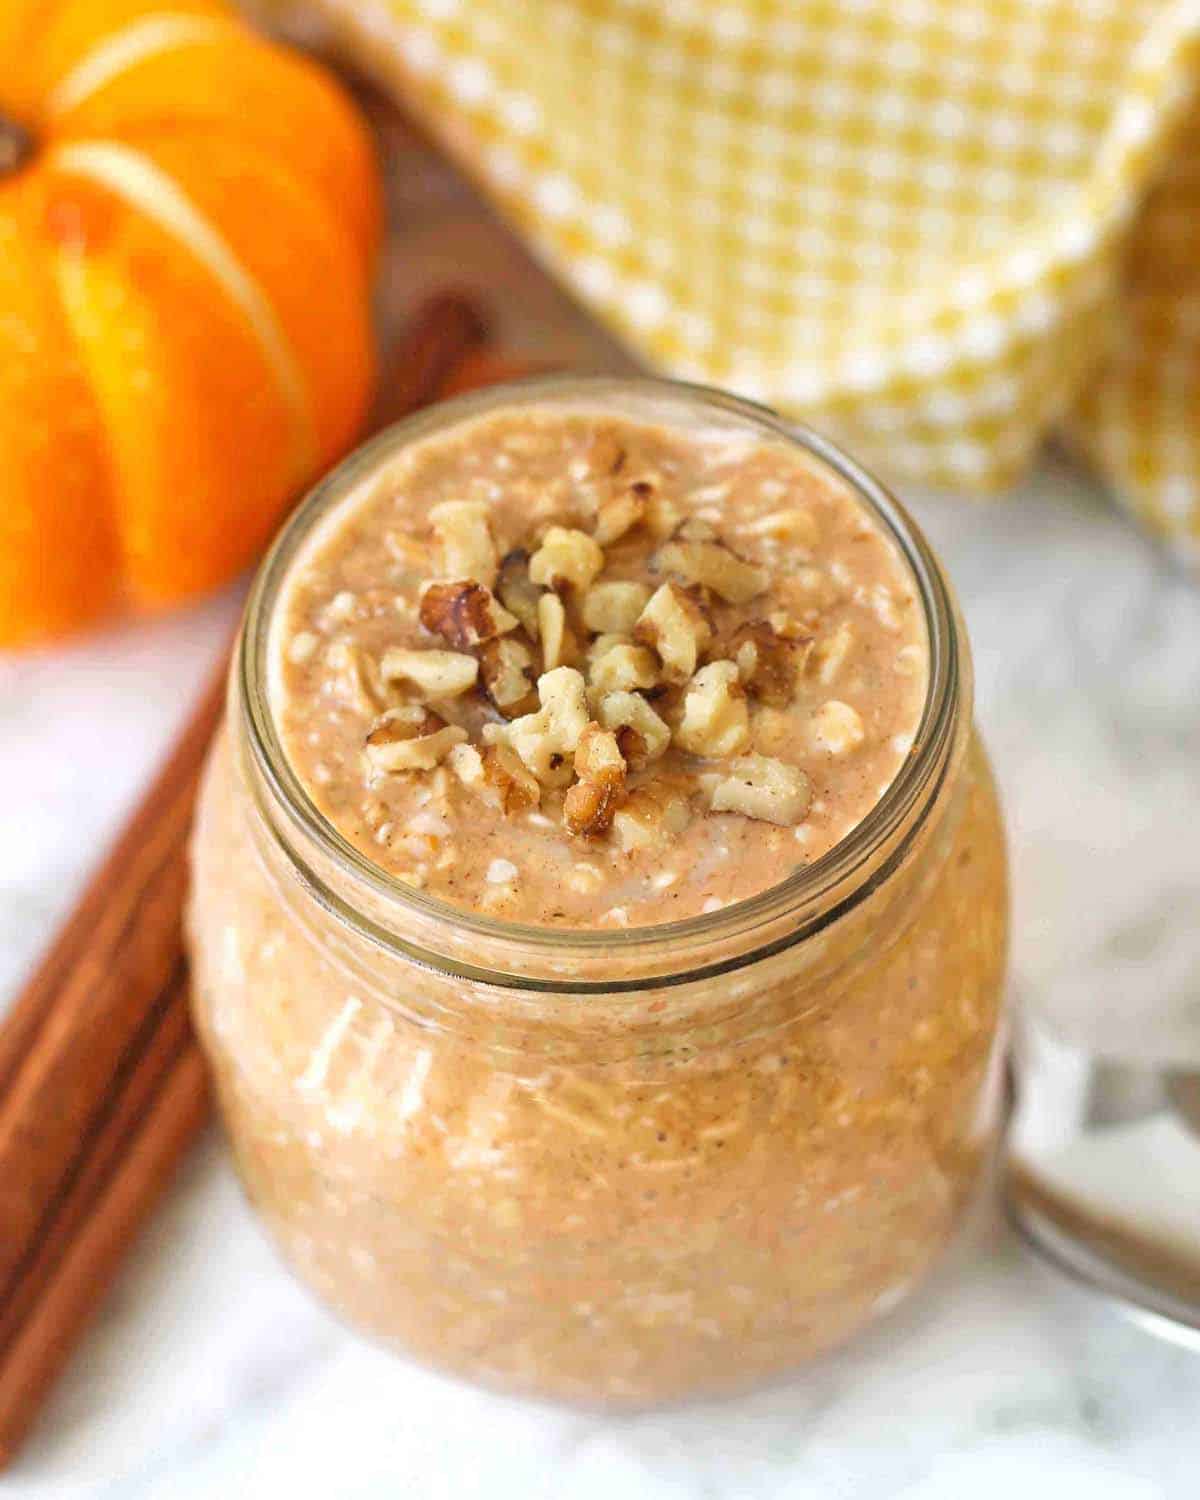 A jar of overnight pumpkin oats with chopped walnuts on top.